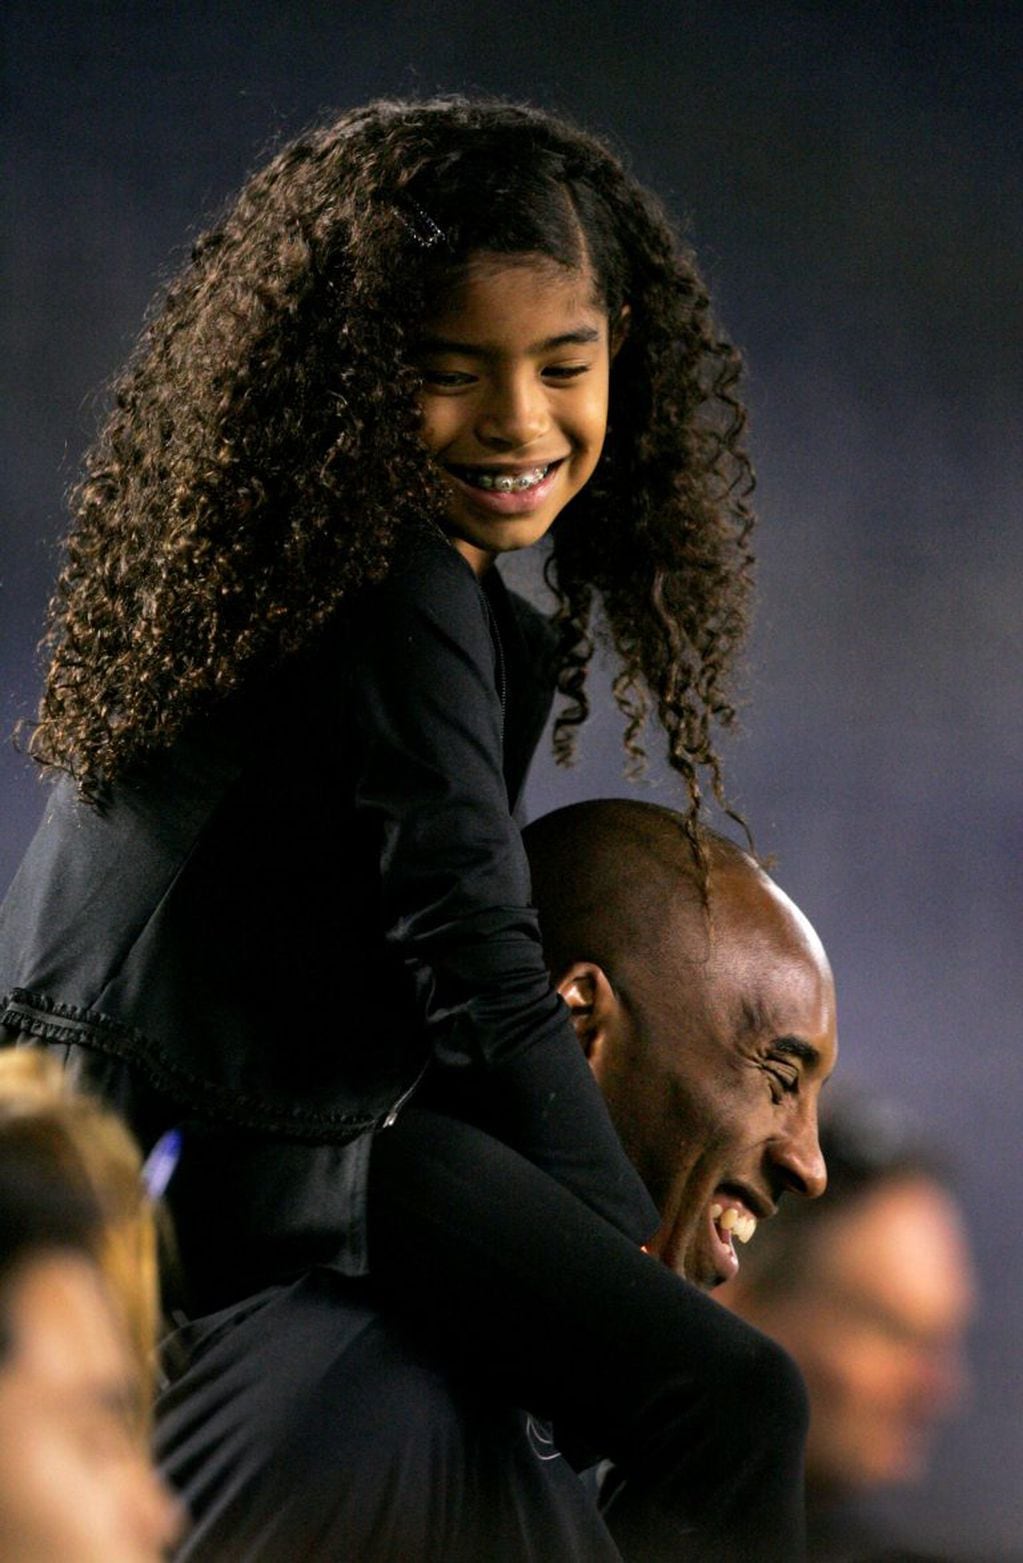 Gianna Maria-Onore Bryant era muy unica a su padre. (Foto:Kent Horner / GETTY IMAGES NORTH AMERICA/AFP)